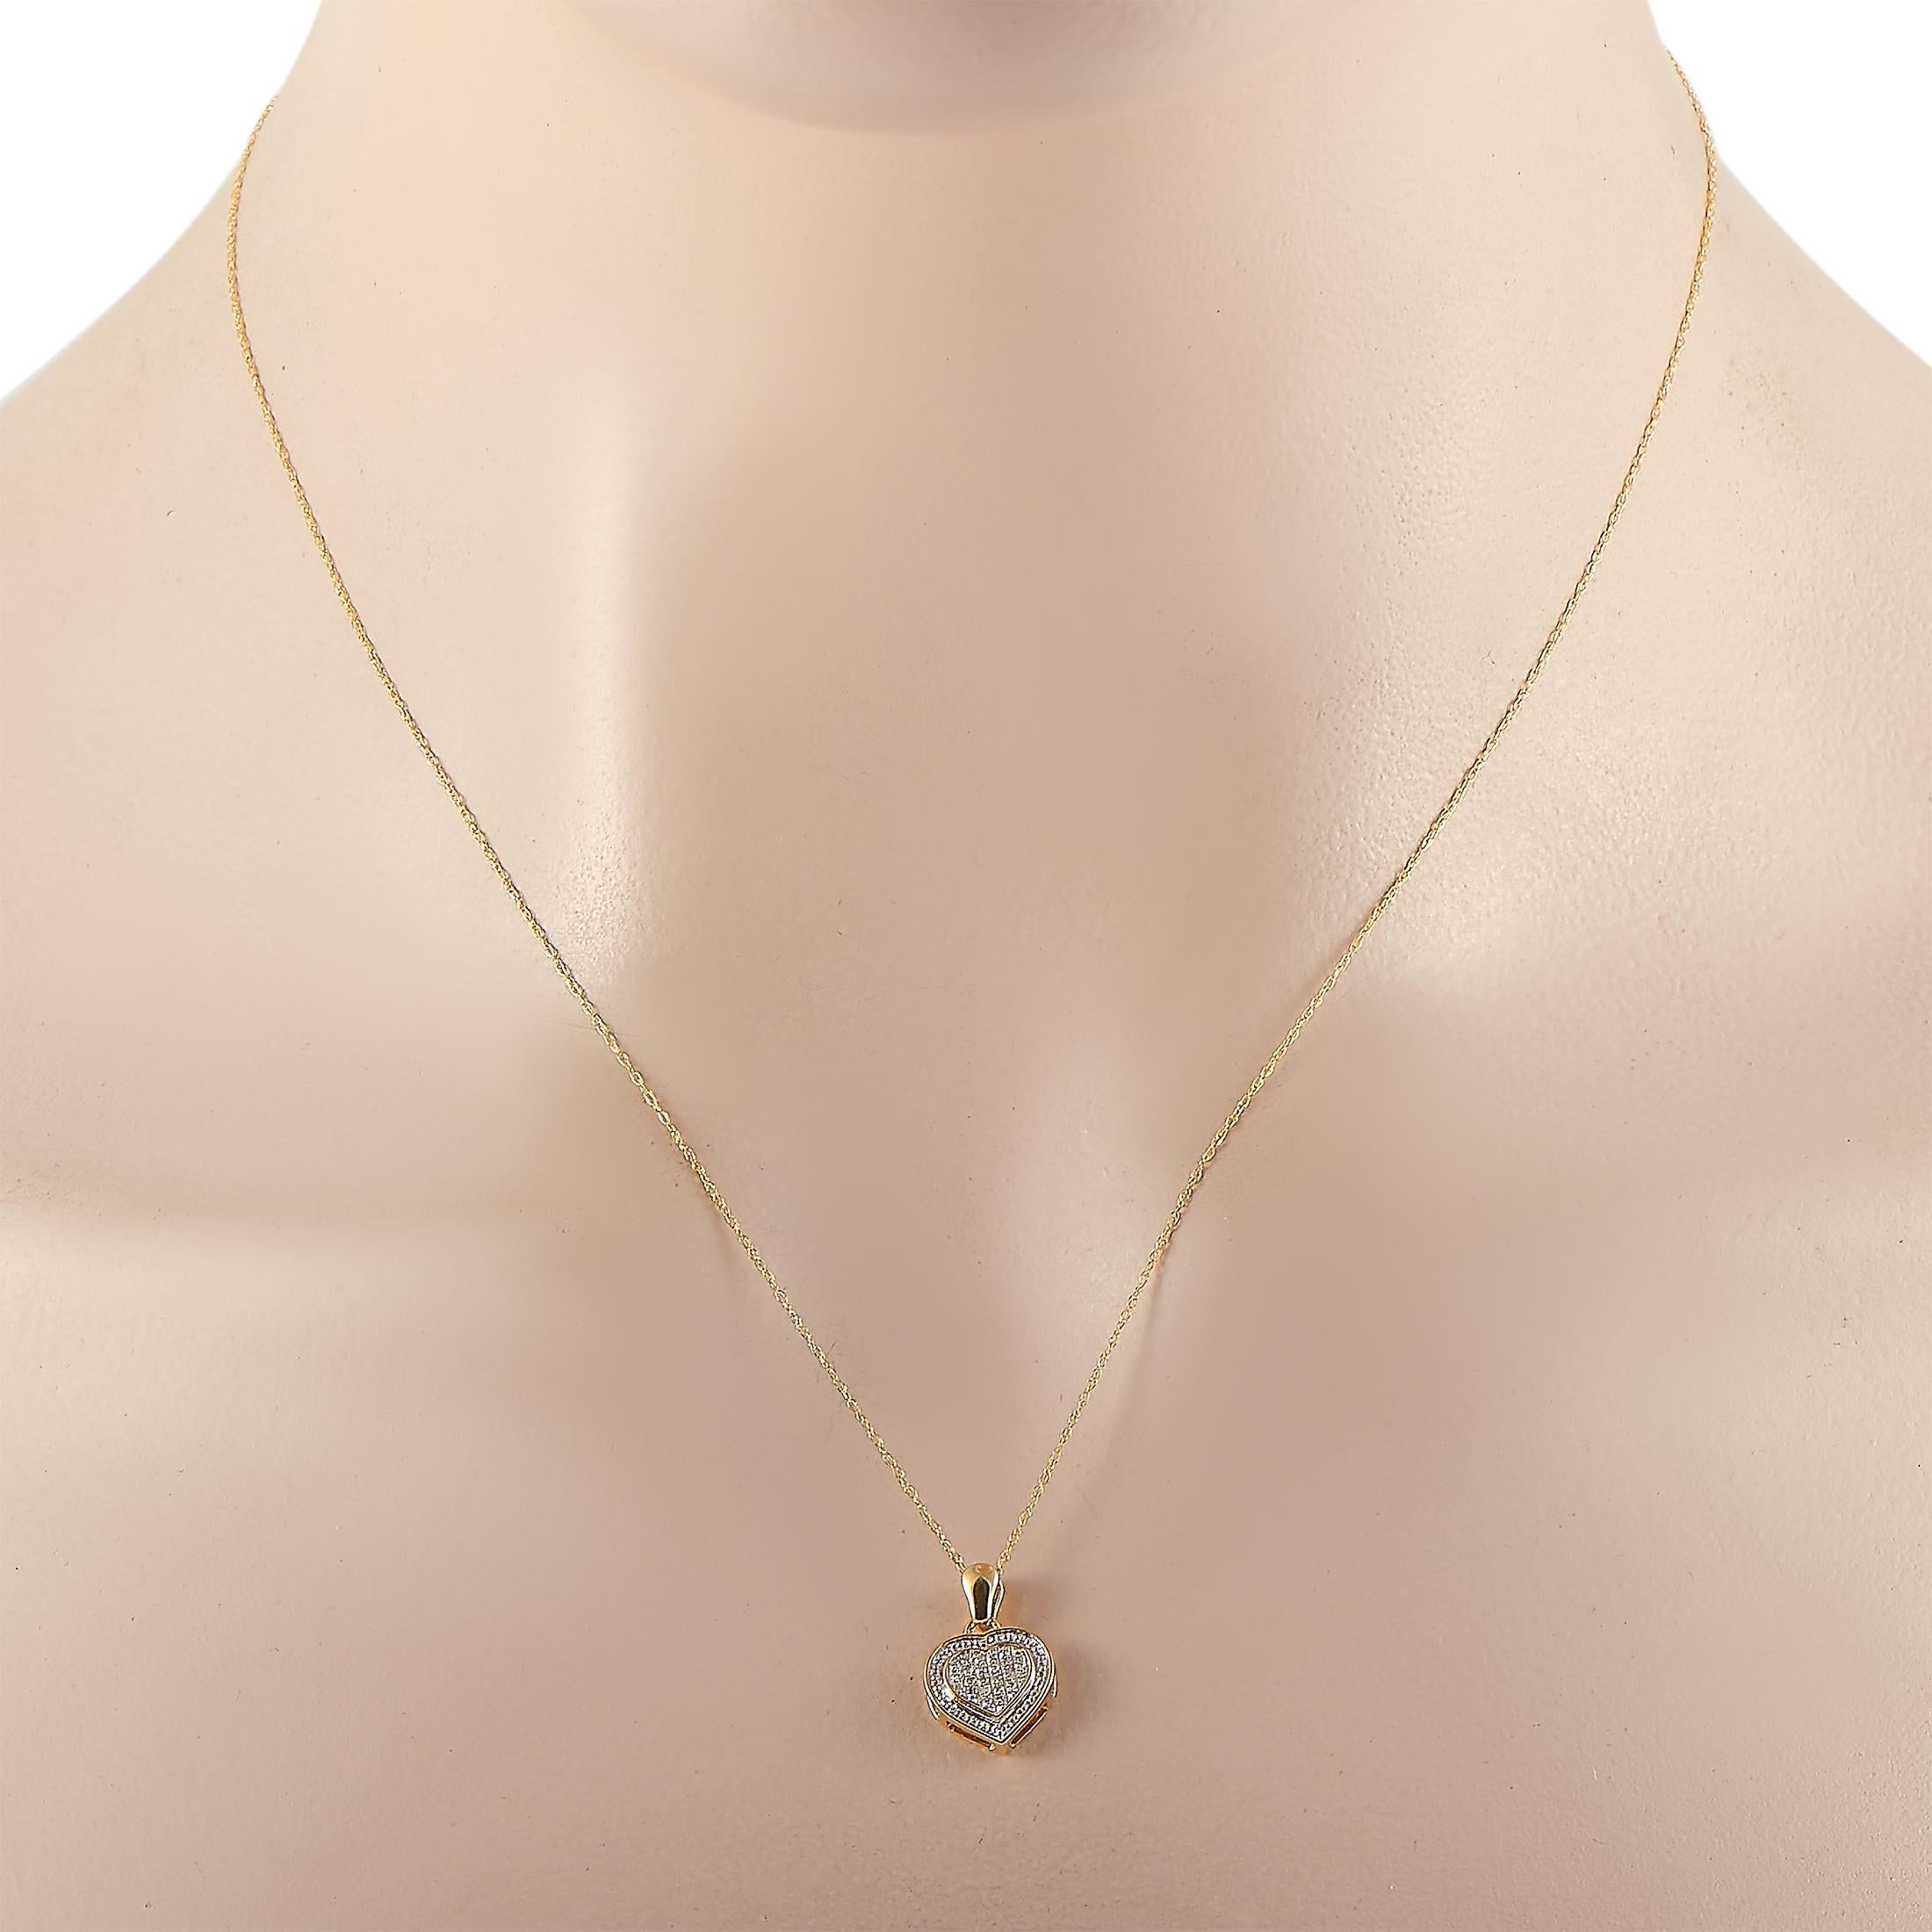 This LB Exclusive necklace is crafted from 14K yellow gold and weighs 1.9 grams. It is presented with an 18” chain and boasts a pendant that measures 0.65” in length and 0.50” in width. The necklace is set with diamonds that total 0.09 carats.
 
